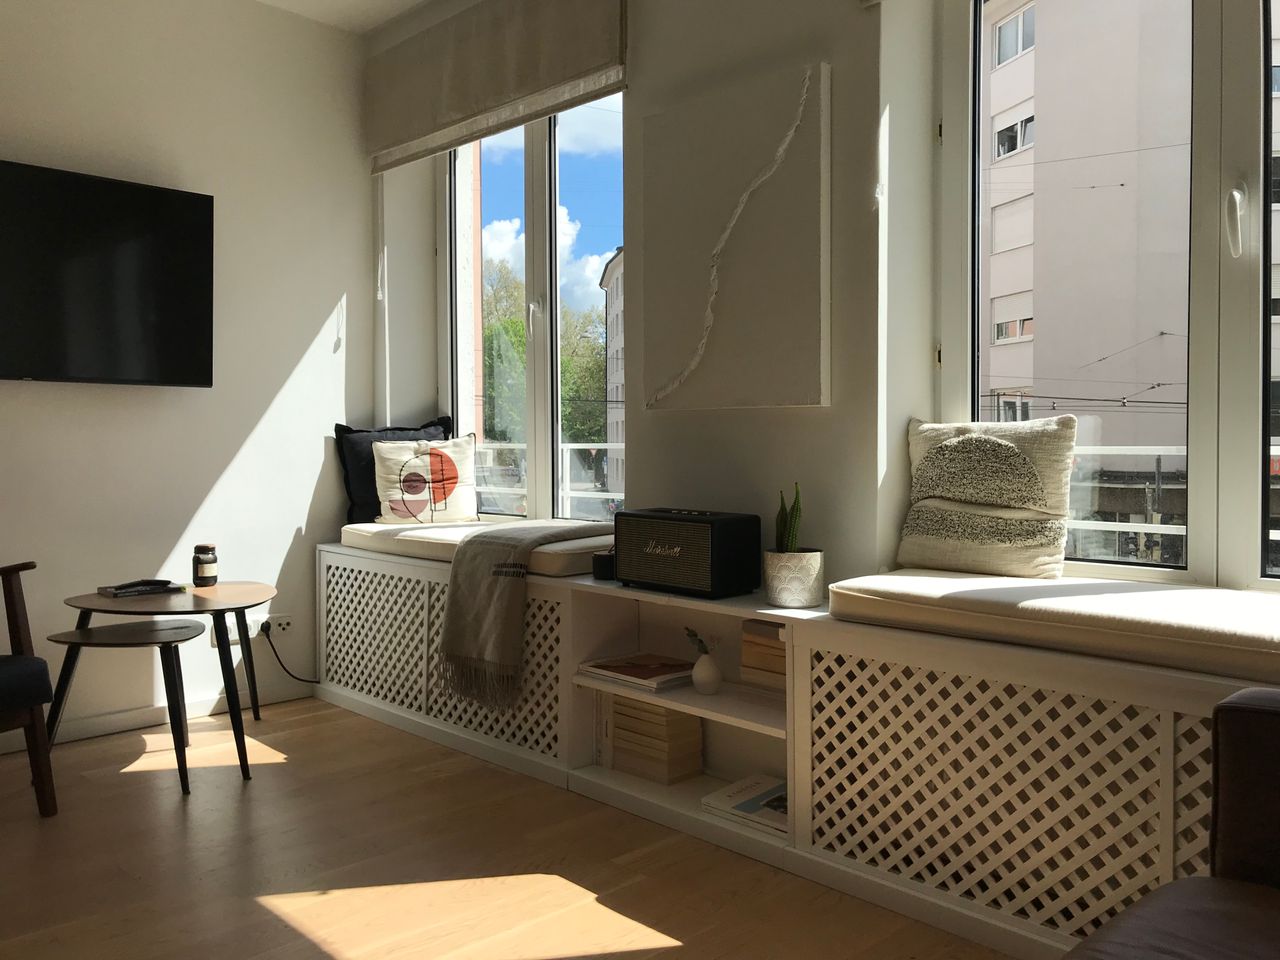 Lovely 3 room apartment in the heart of Munich